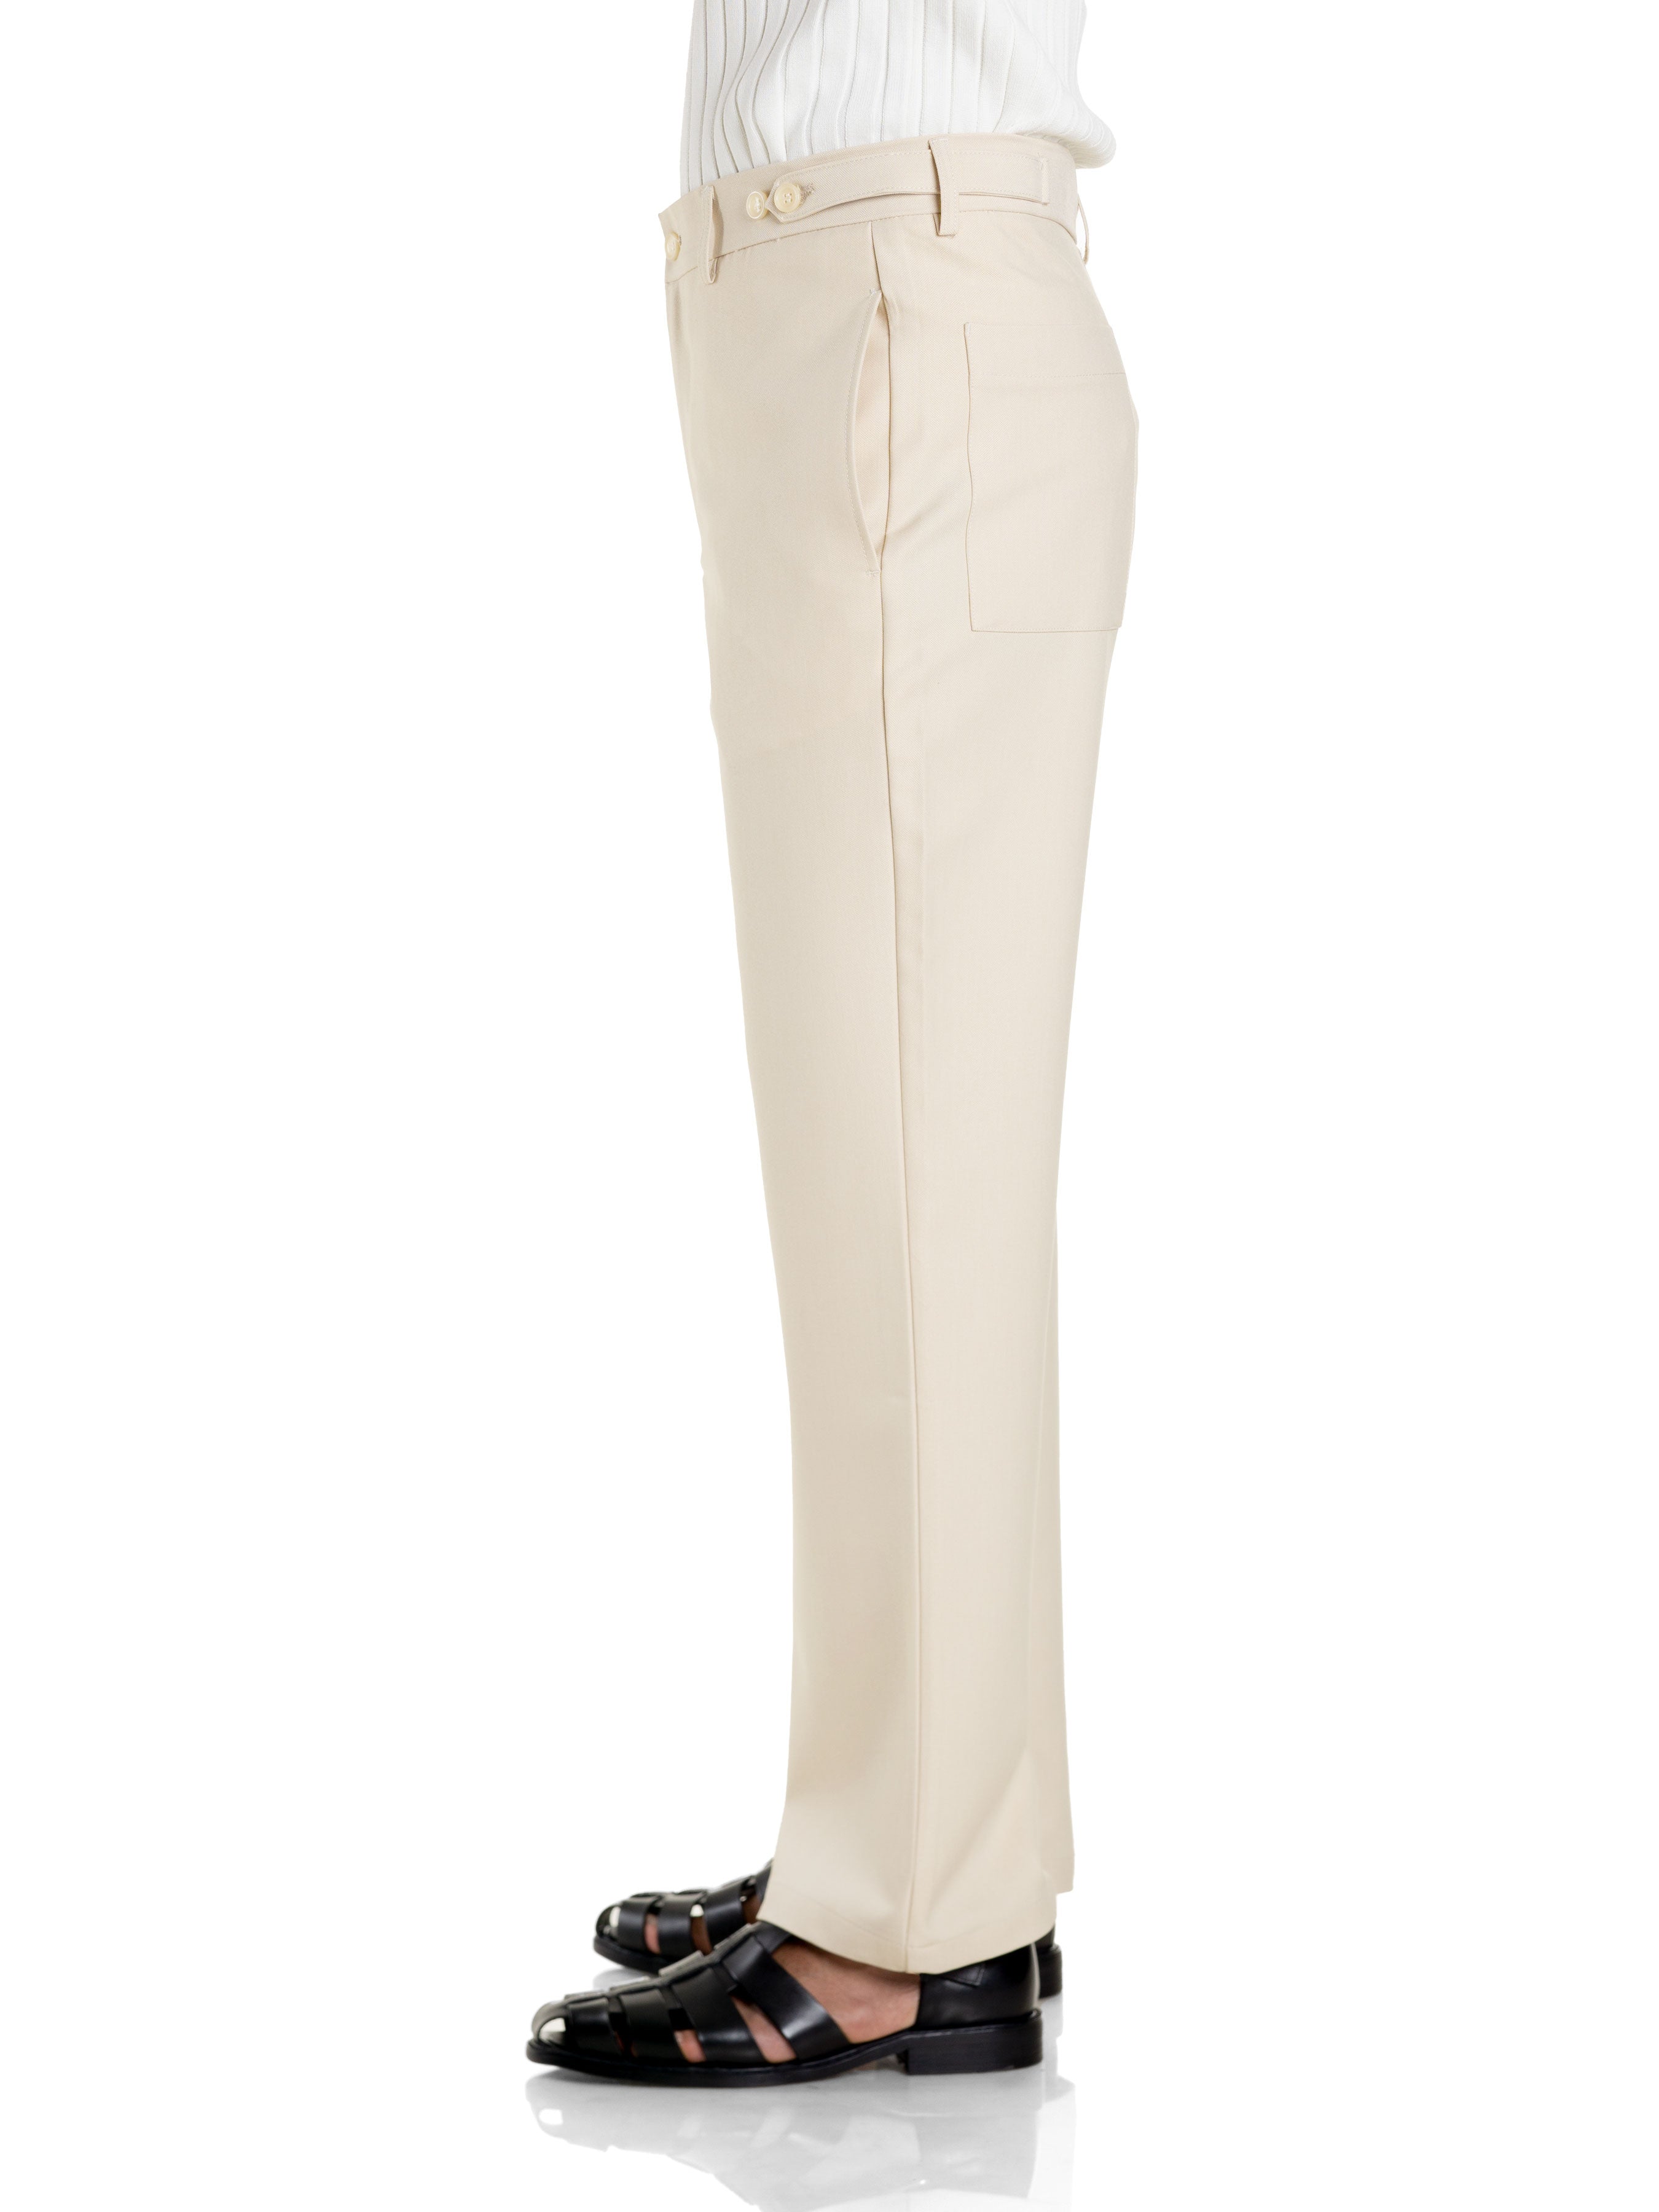 Trousers Belt Loop With Side Adjusters - Cream (Straight Cut) - Zeve Shoes